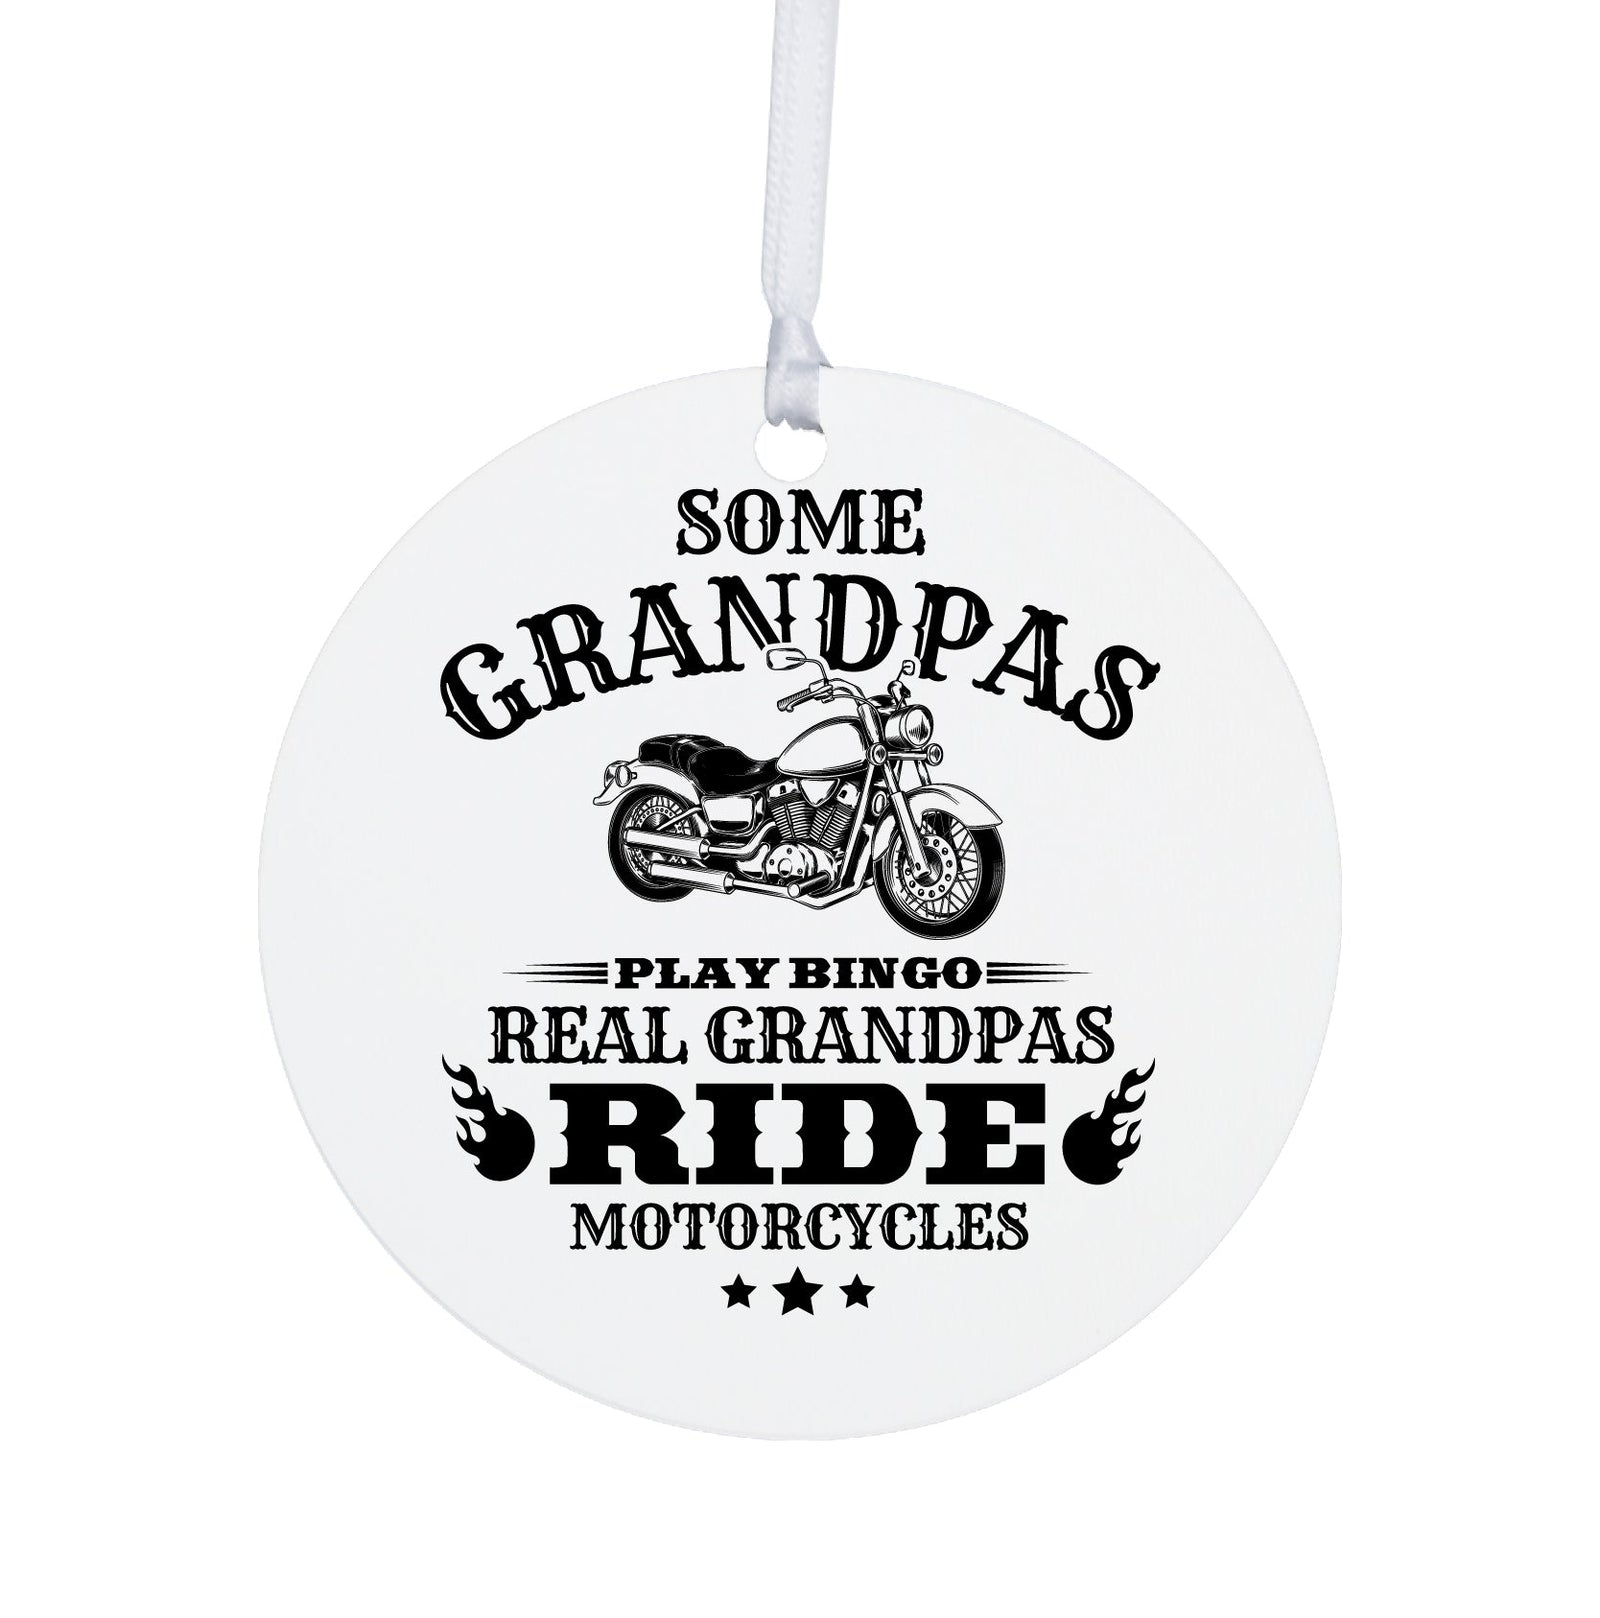 Grandparents’ White Ornament With Inspirational Message Gift Ideas - Some Grandpas Play Bingo. Real Grandpa Ride Motorcycles - LifeSong Milestones